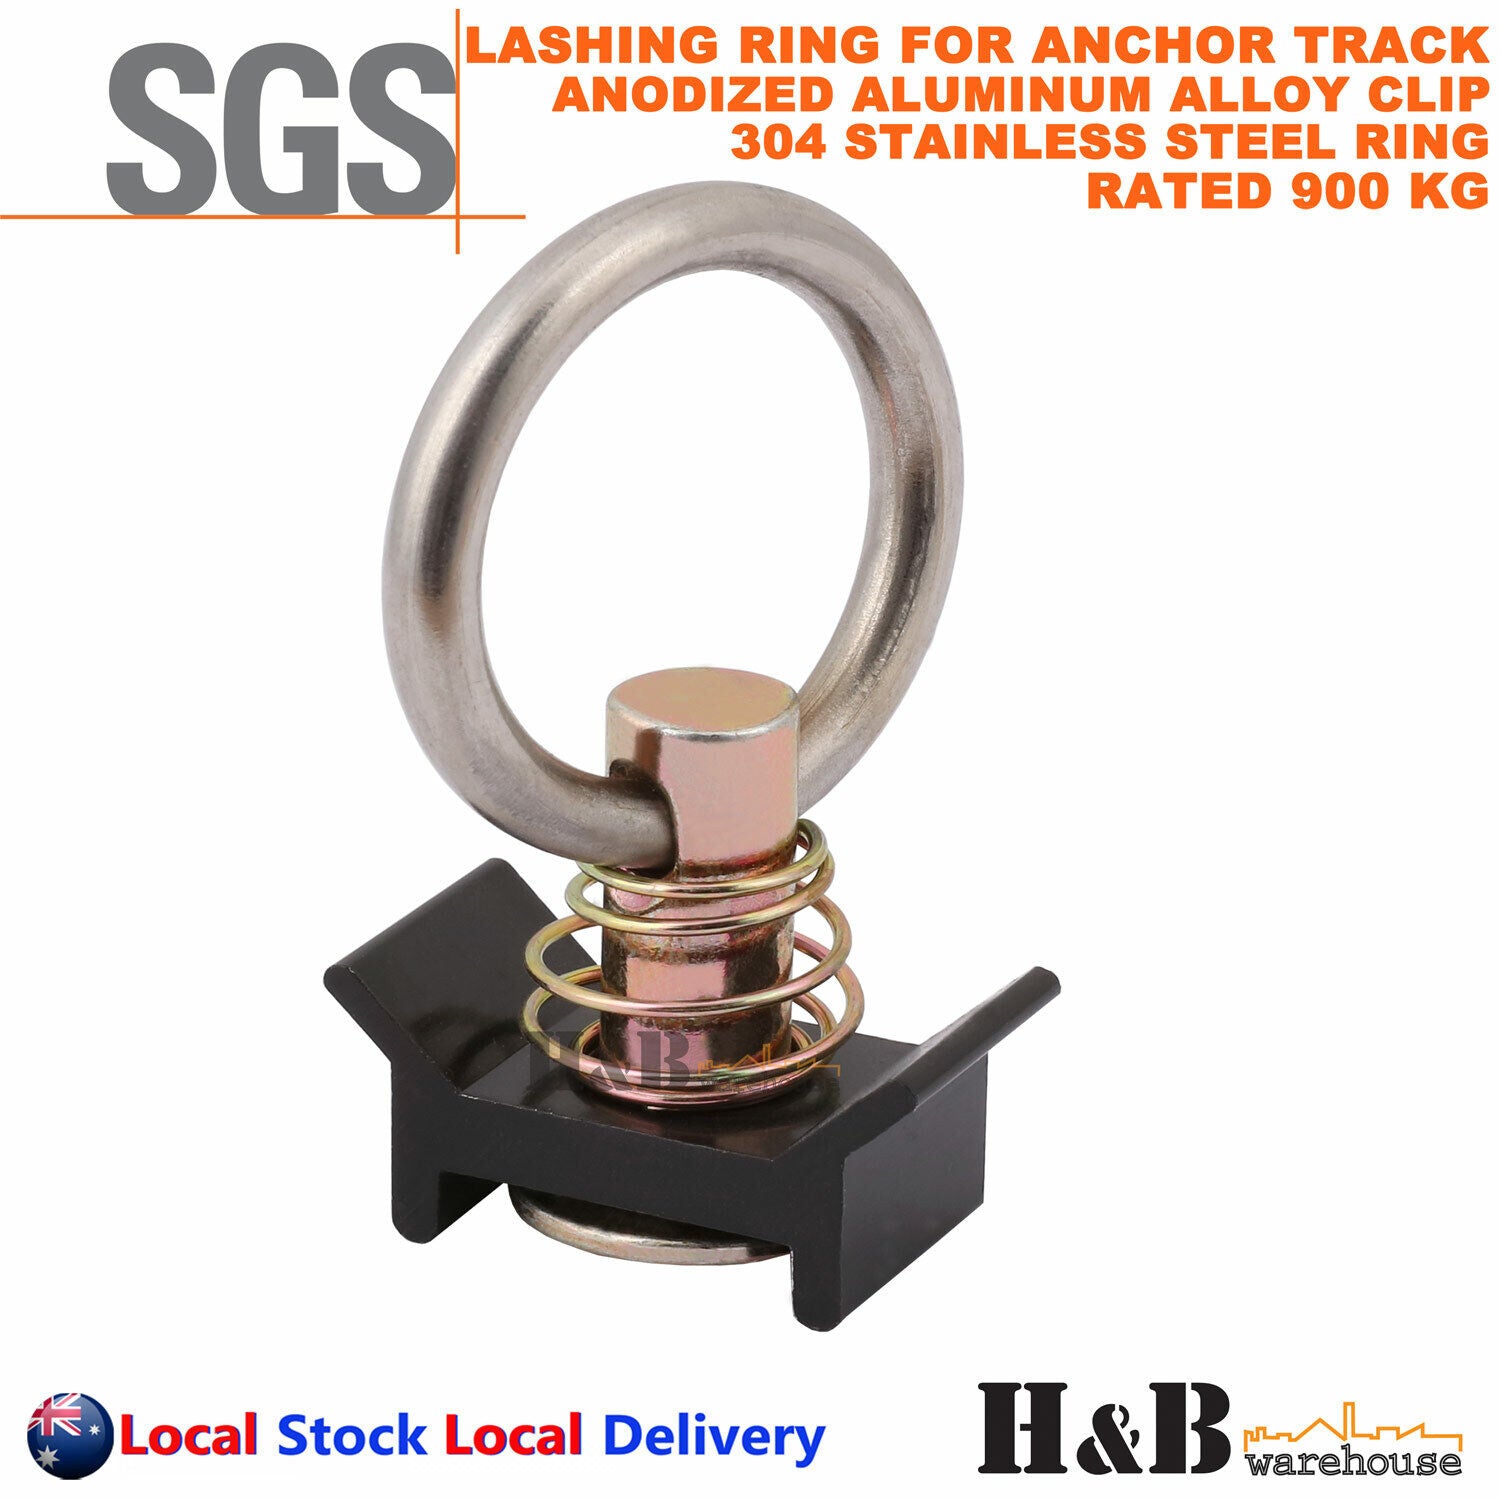 6X Anchor Track Lashing point Ring Clip 900KG Rated Trailer Truck Ute